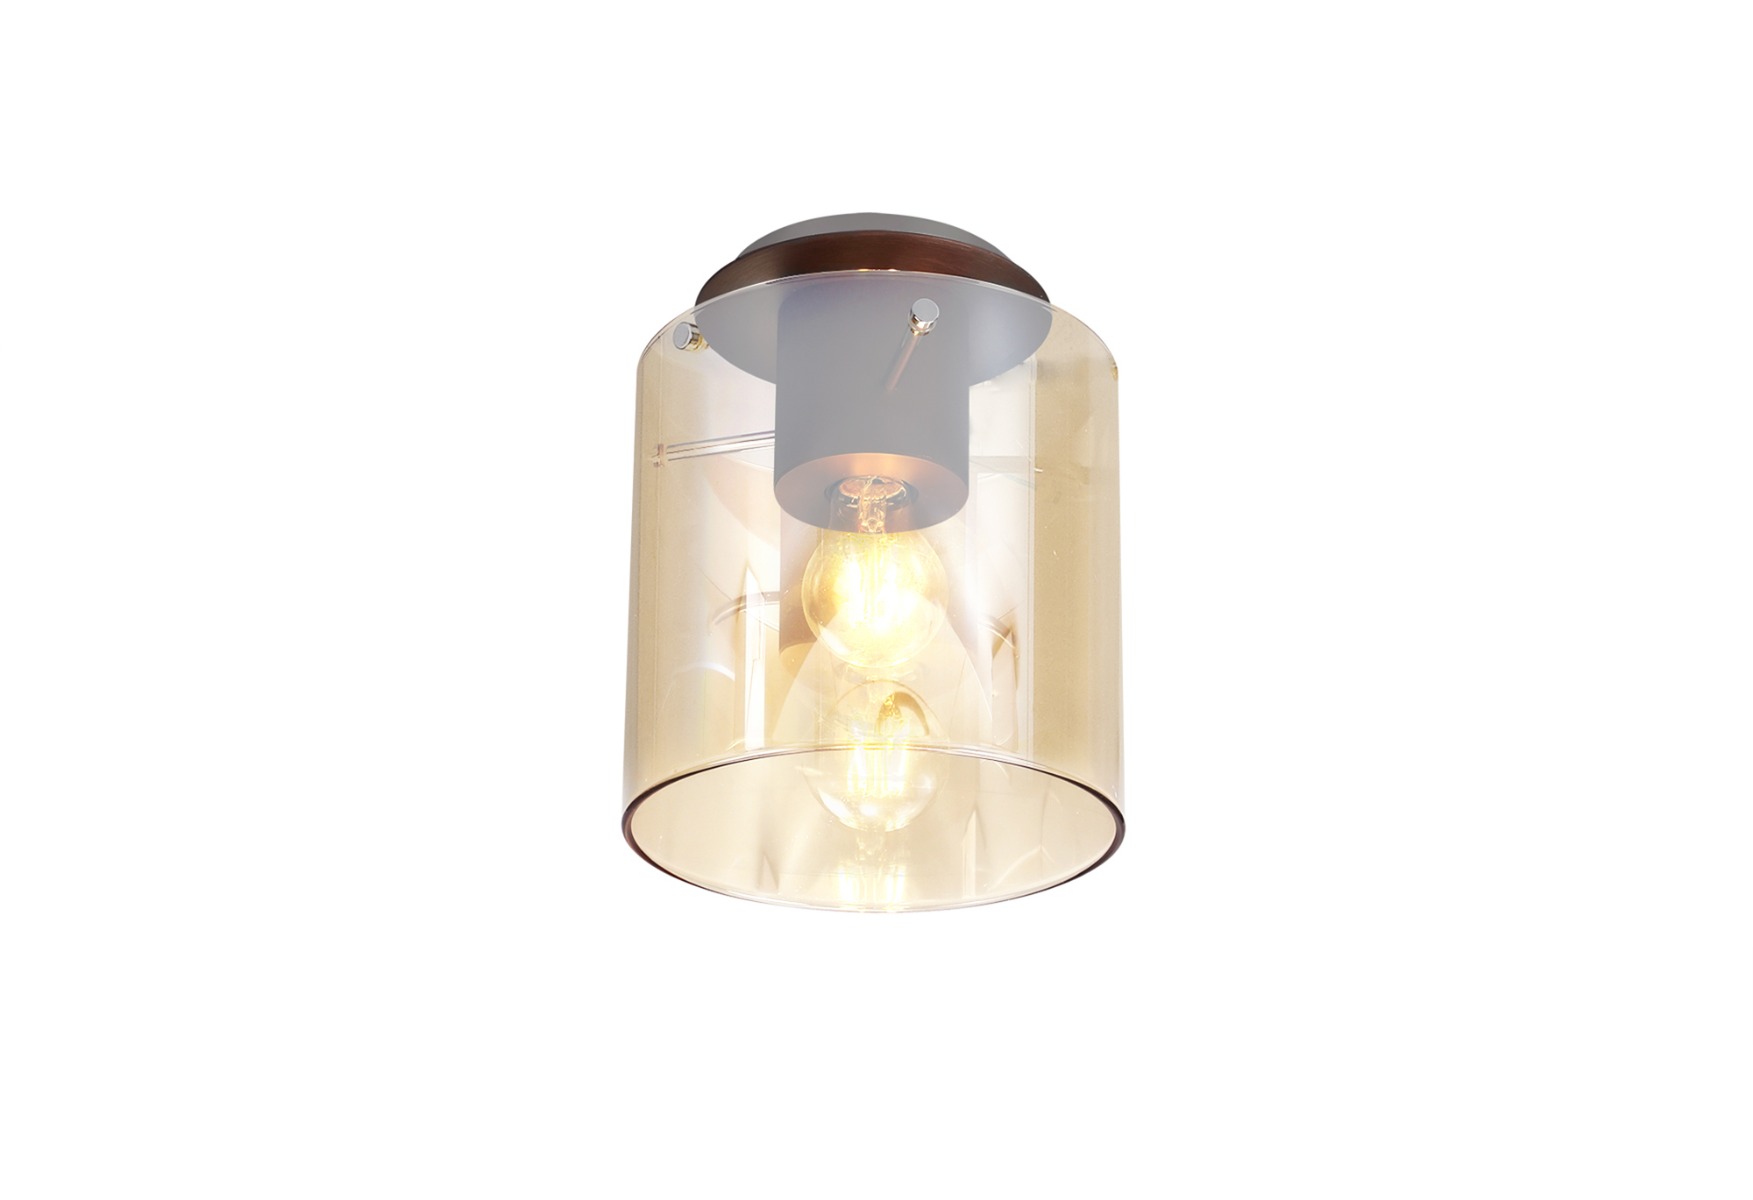 Image of Nordic 1 Light Flush Ceiling Light in Mocha Finish With Amber Glass